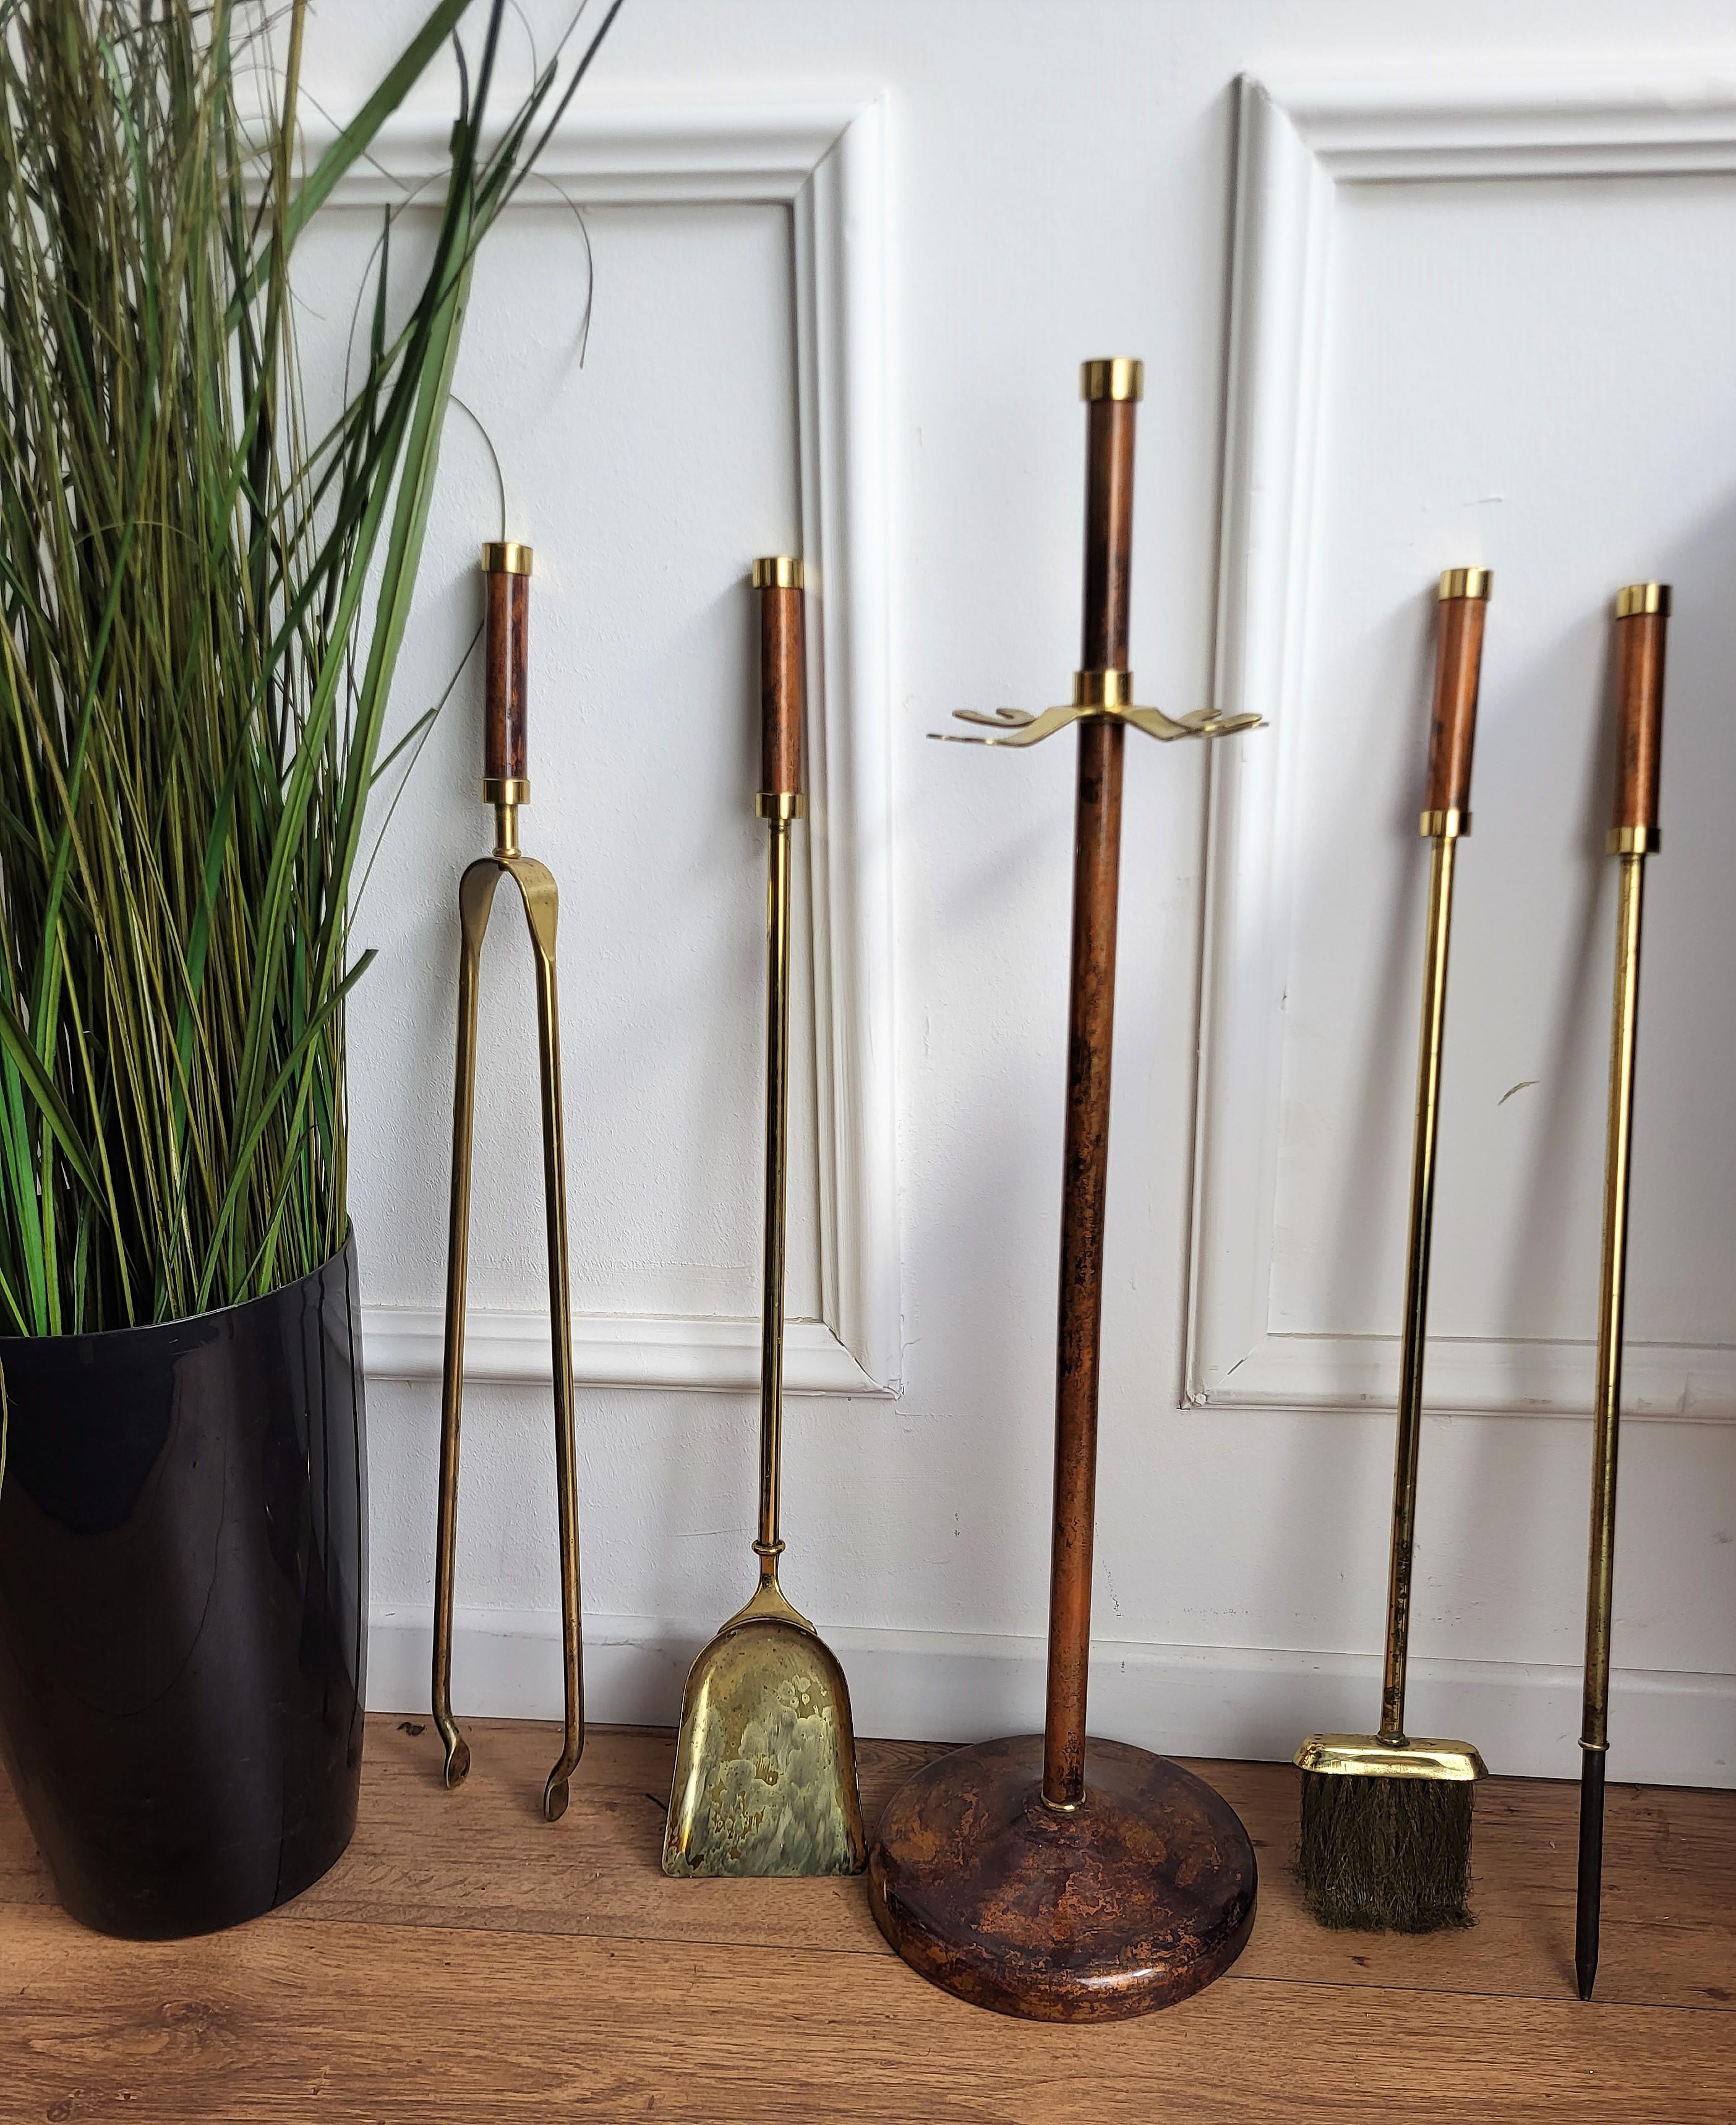 Italian brass and burl veneer wood four-pieces fire tool set with stand. The set consists of a poker, a shovel and a pair of tongs, each with an ornate handle such as the stand in beautiful shape.

.